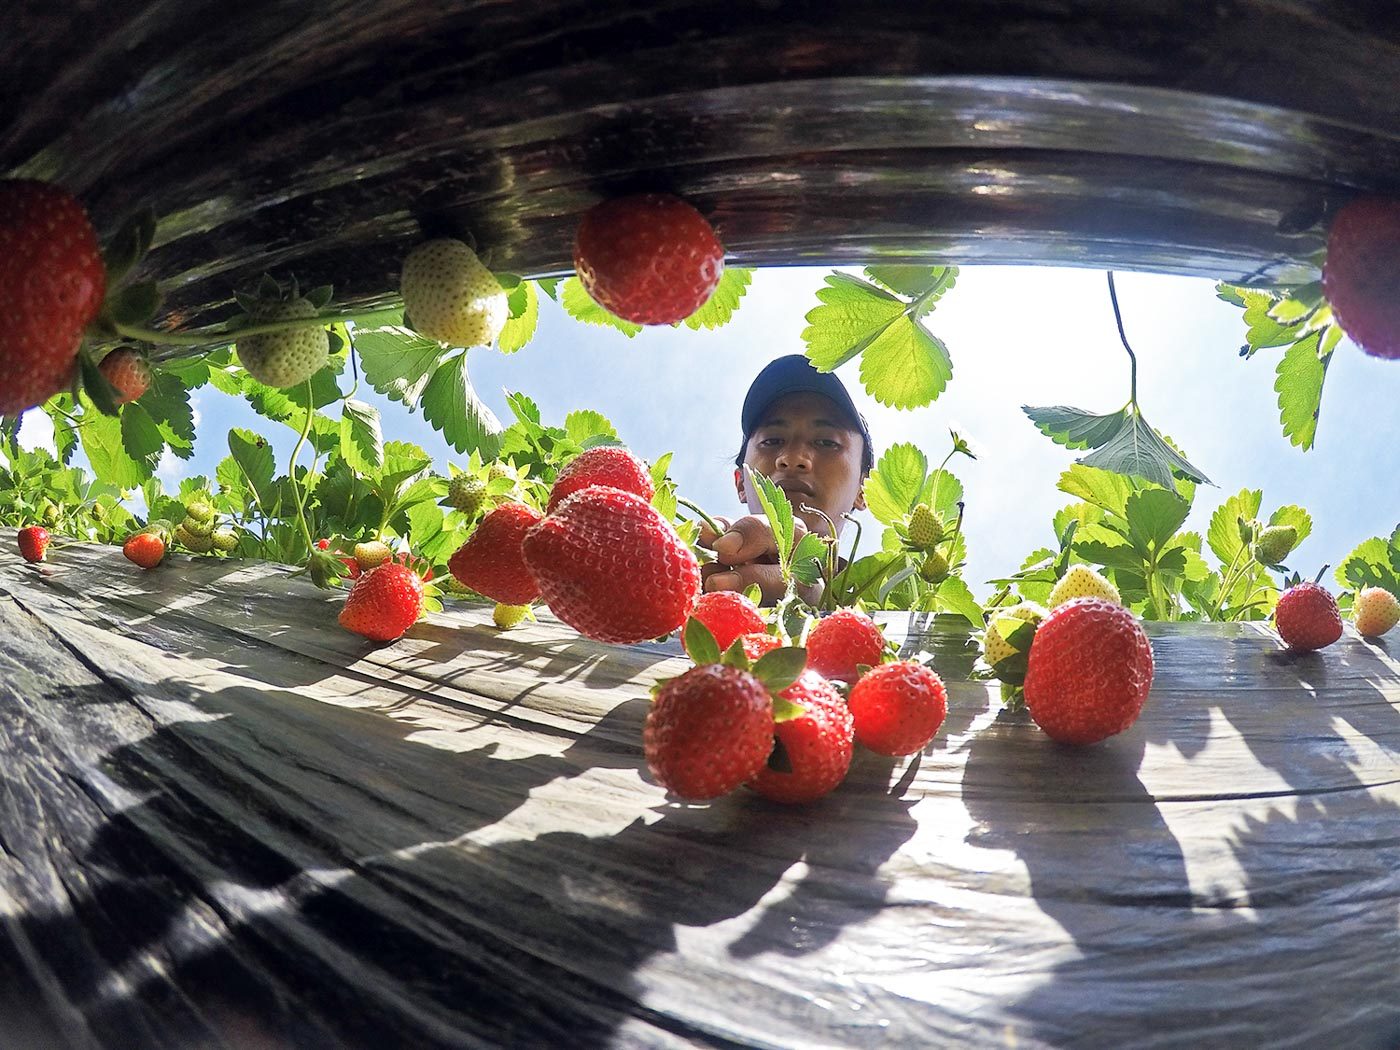 HIGHER YIELD. Victor Palocpoc of La Trinidad, Benguet, has been able to harvest more strawberries, thanks to the elevated plot technolog, where farmers increase their production by planting upwards. Photo by Mau Victa/Rappler   